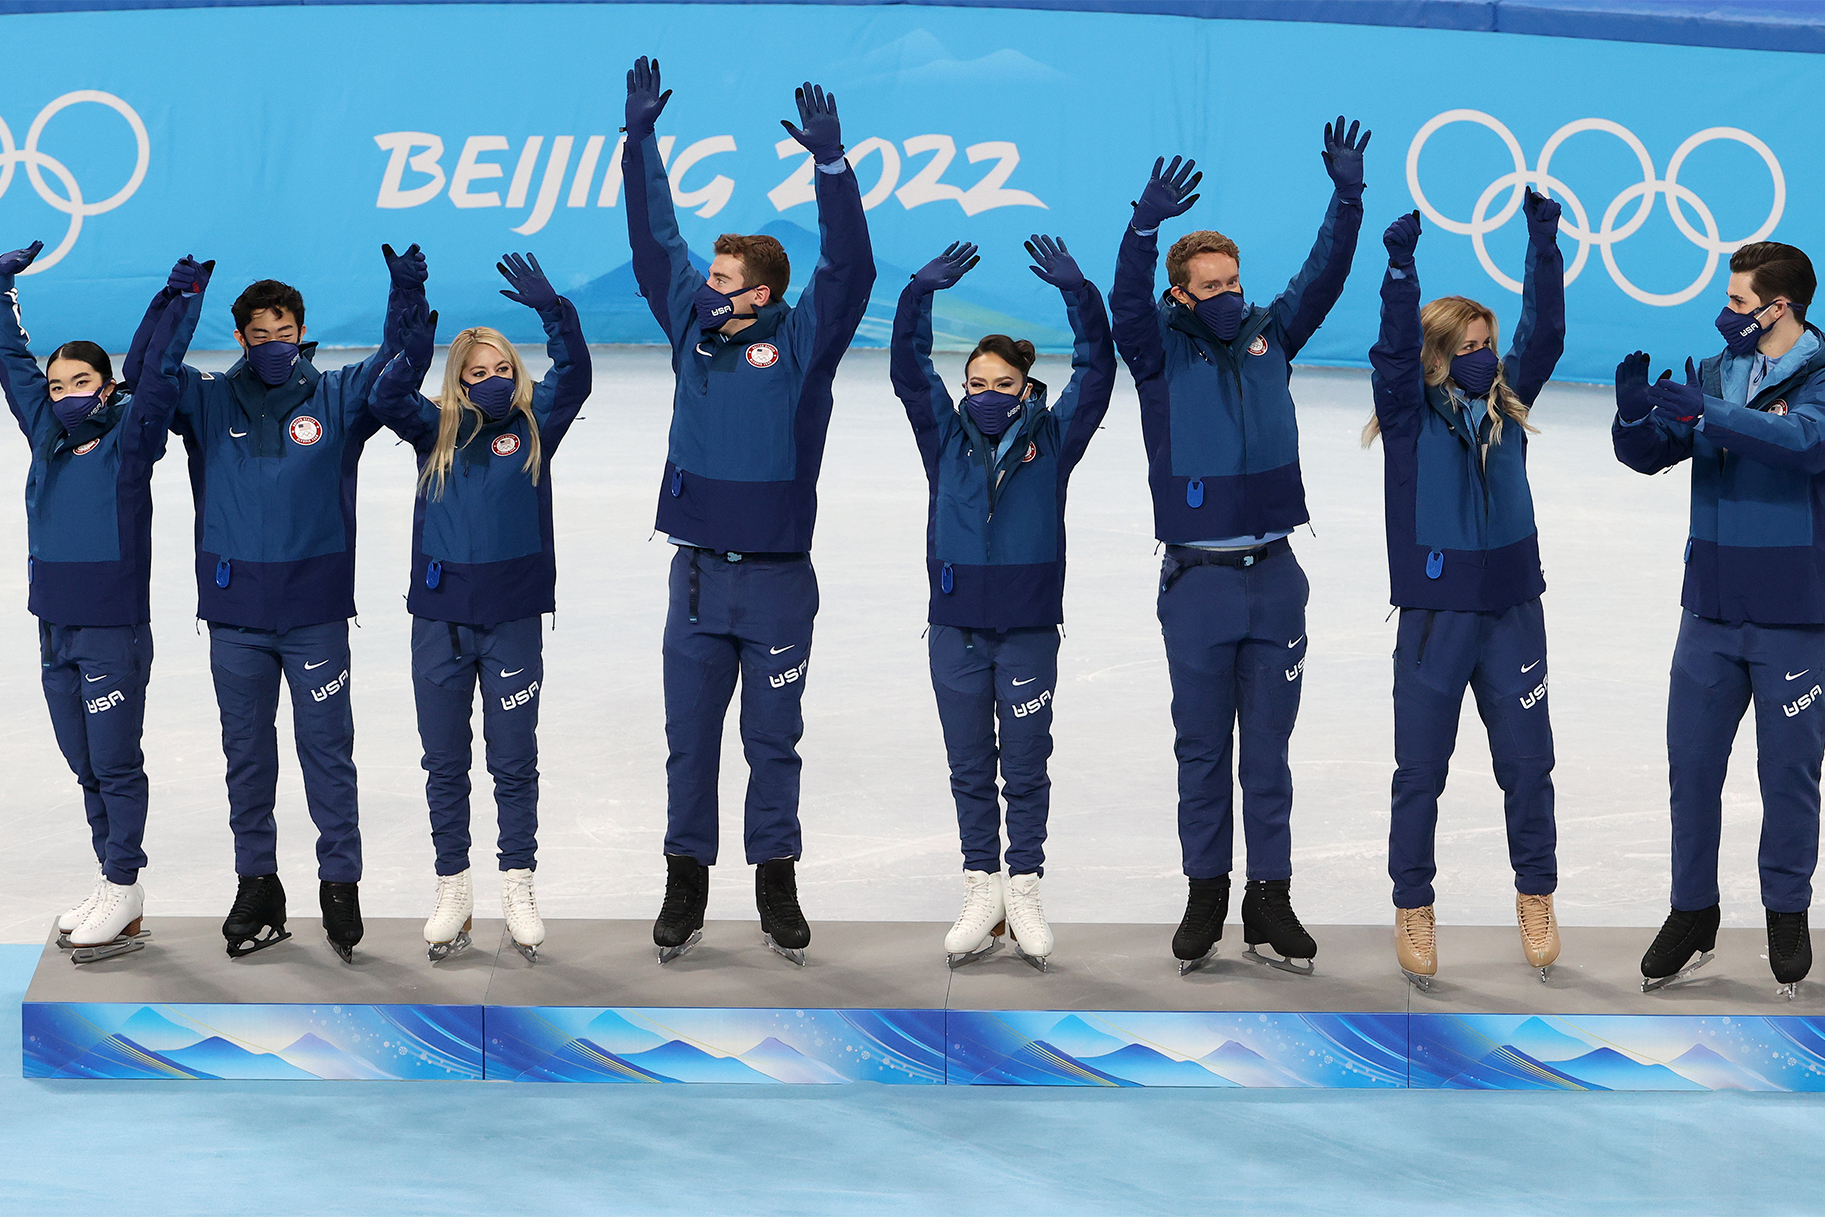 Team Usa during the medal ceremony for Ice Skating at the Beijing 2022 Winter Olympic Games